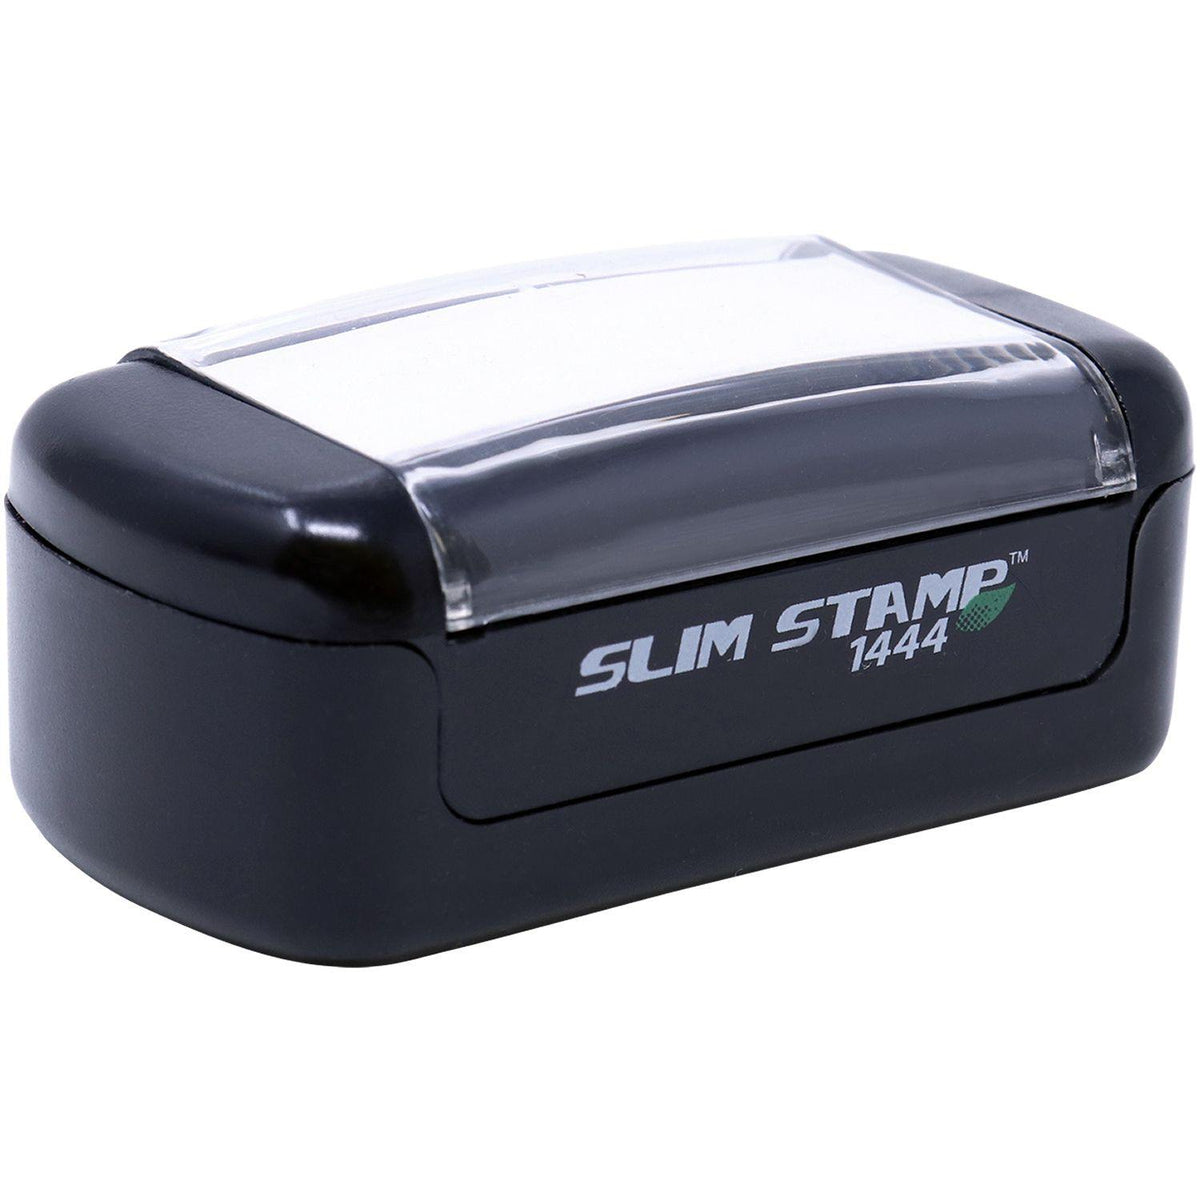 Alt View of Slim Pre Inked Living Will On File Stamp Mount Angle